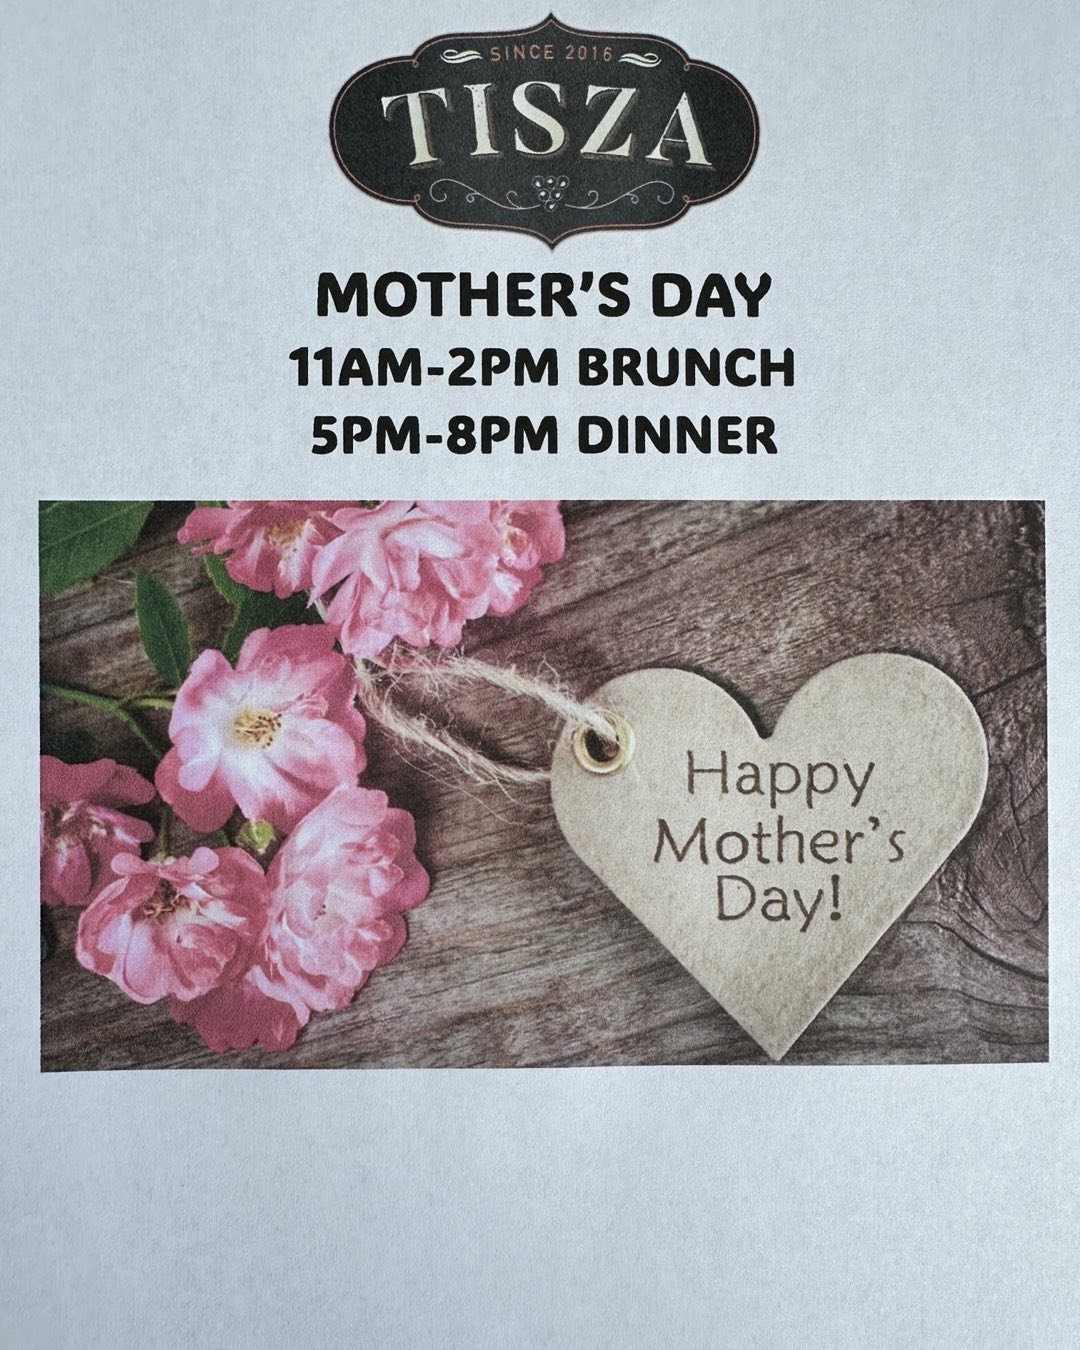 We have special hours on Mother&rsquo;s Day&hellip;view our brunch menu &amp; book your table at tiszabistro.com